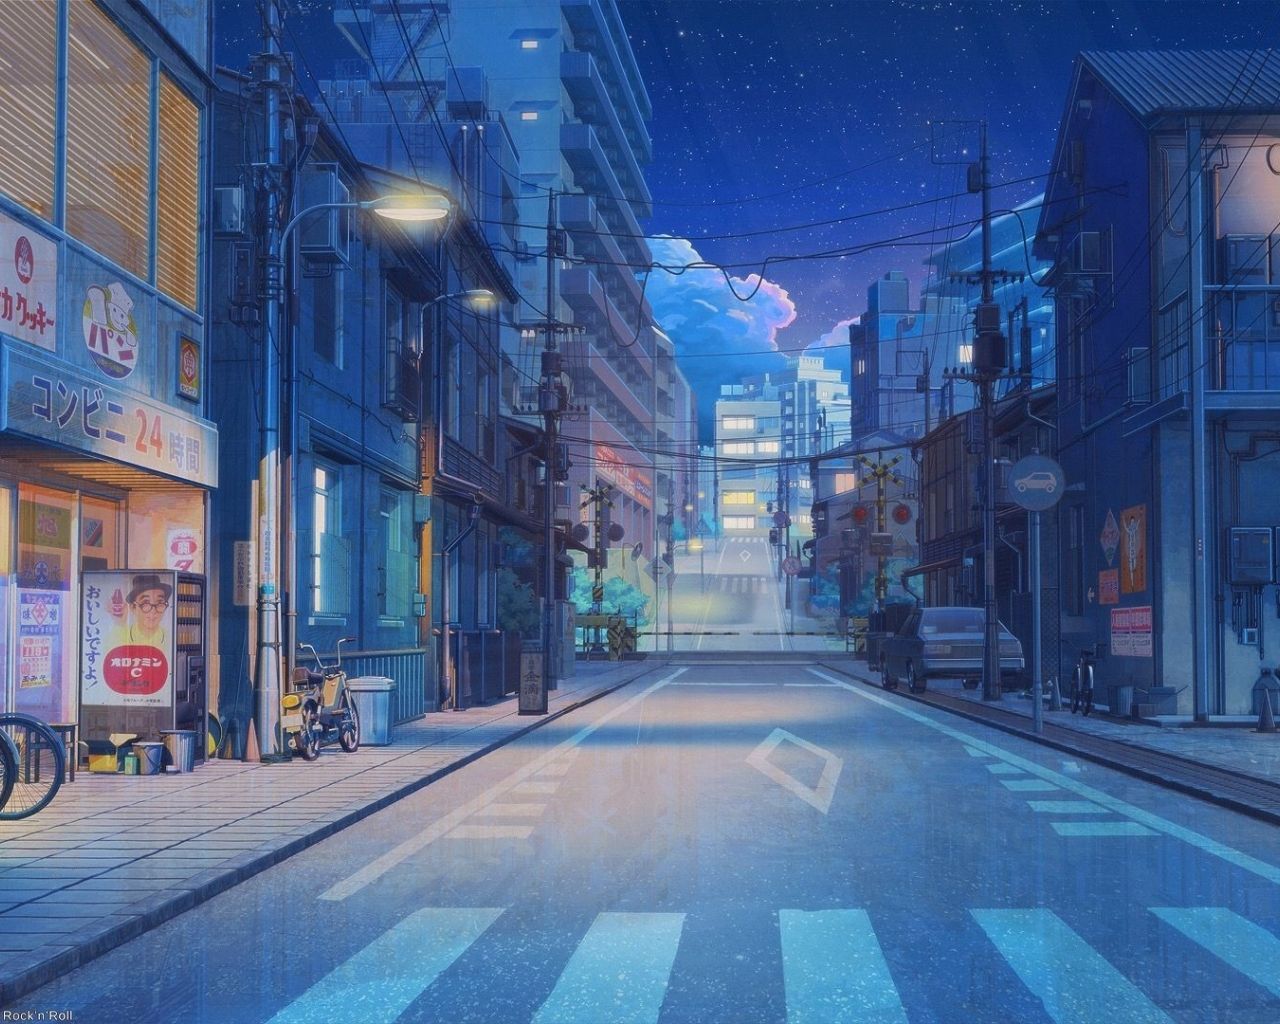 An anime style image of a street at night - Blue anime